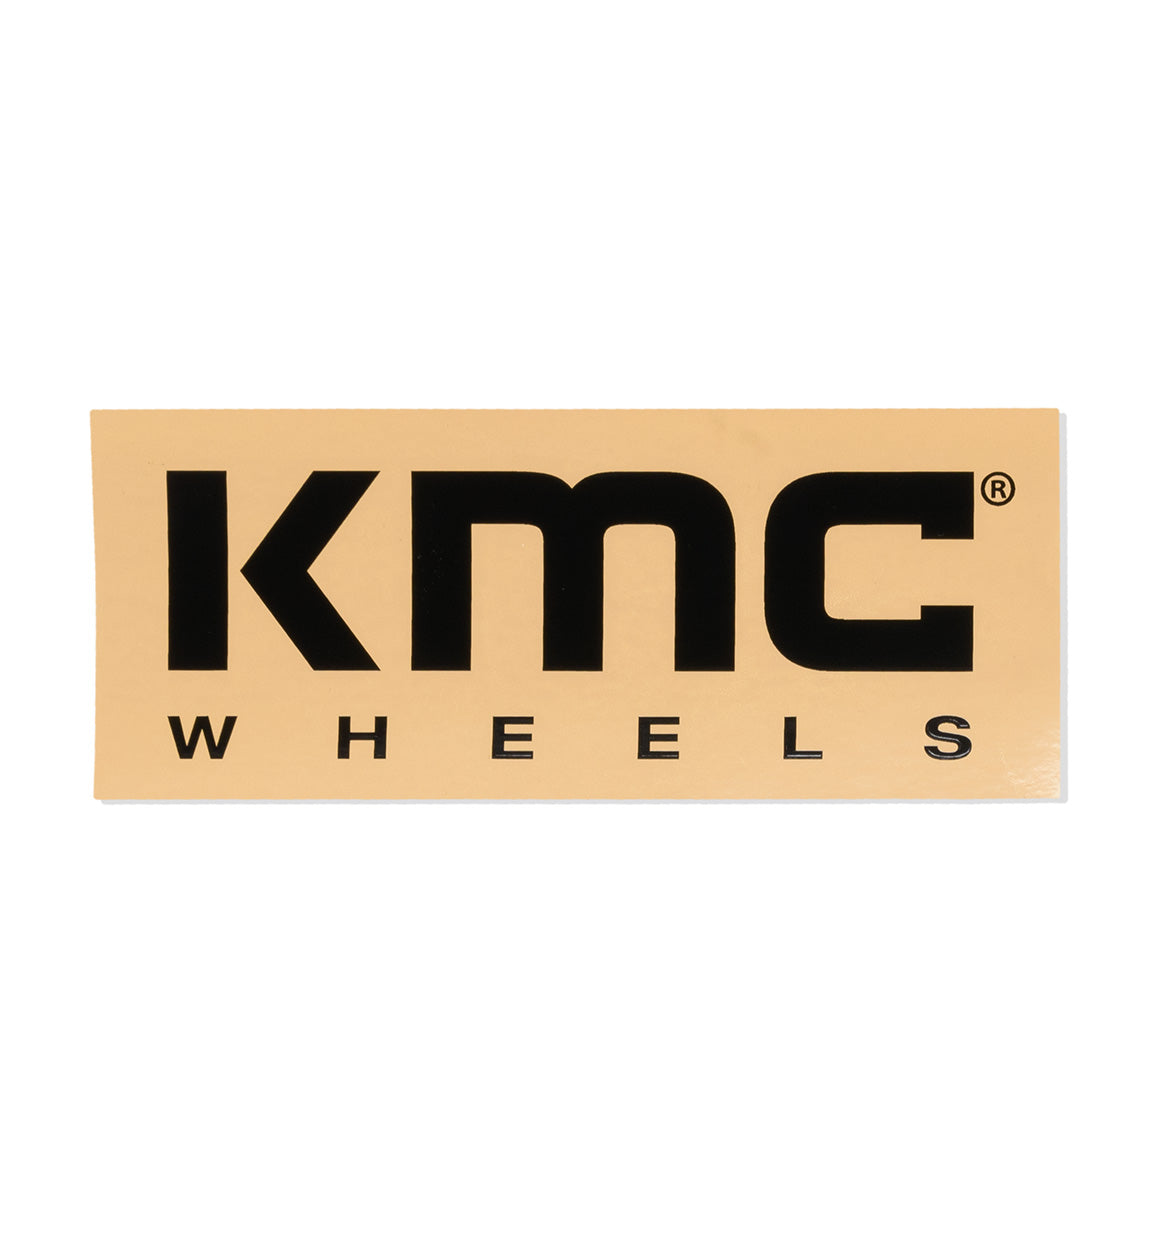 Professional, Masculine, Construction Company Logo Design for KMC Group by  Elma0405 | Design #24701048